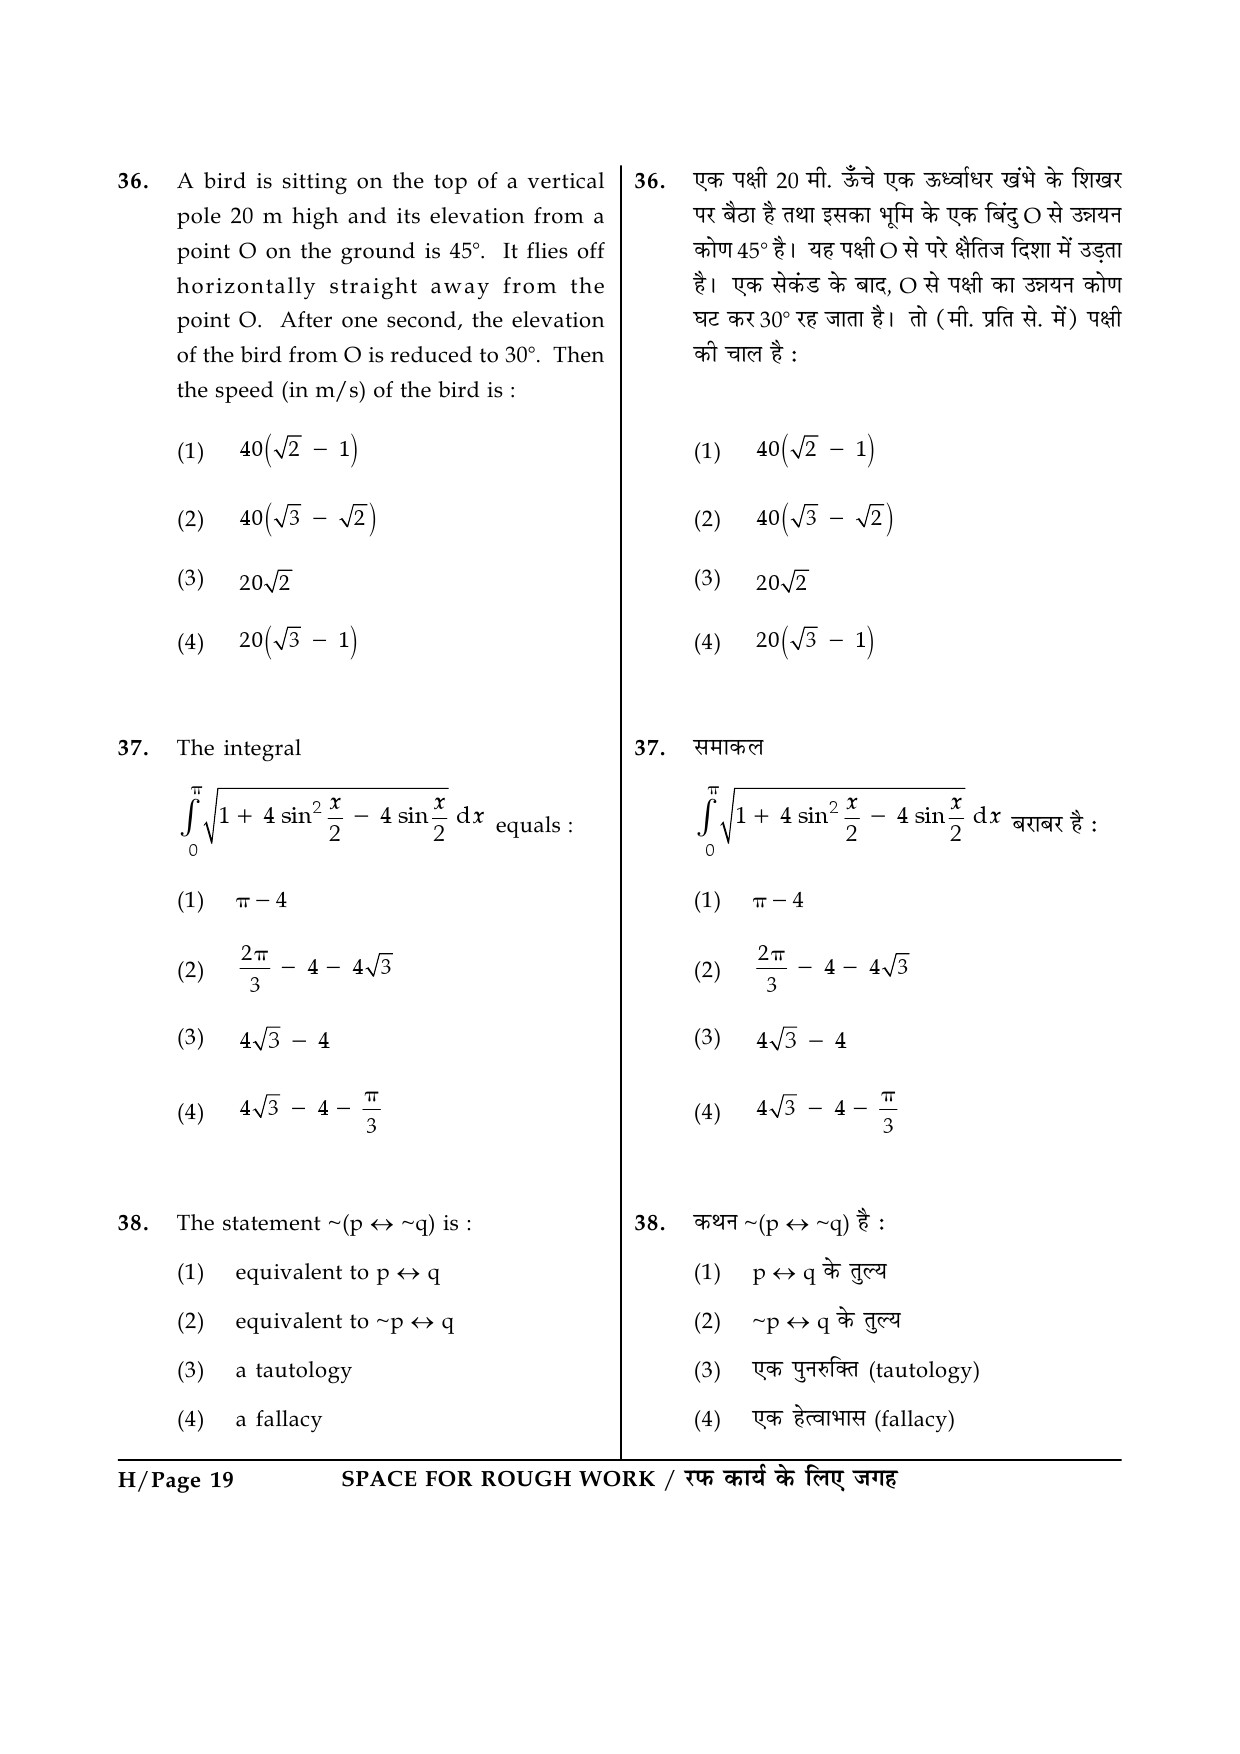 JEE Main Exam Question Paper 2014 Booklet H 19